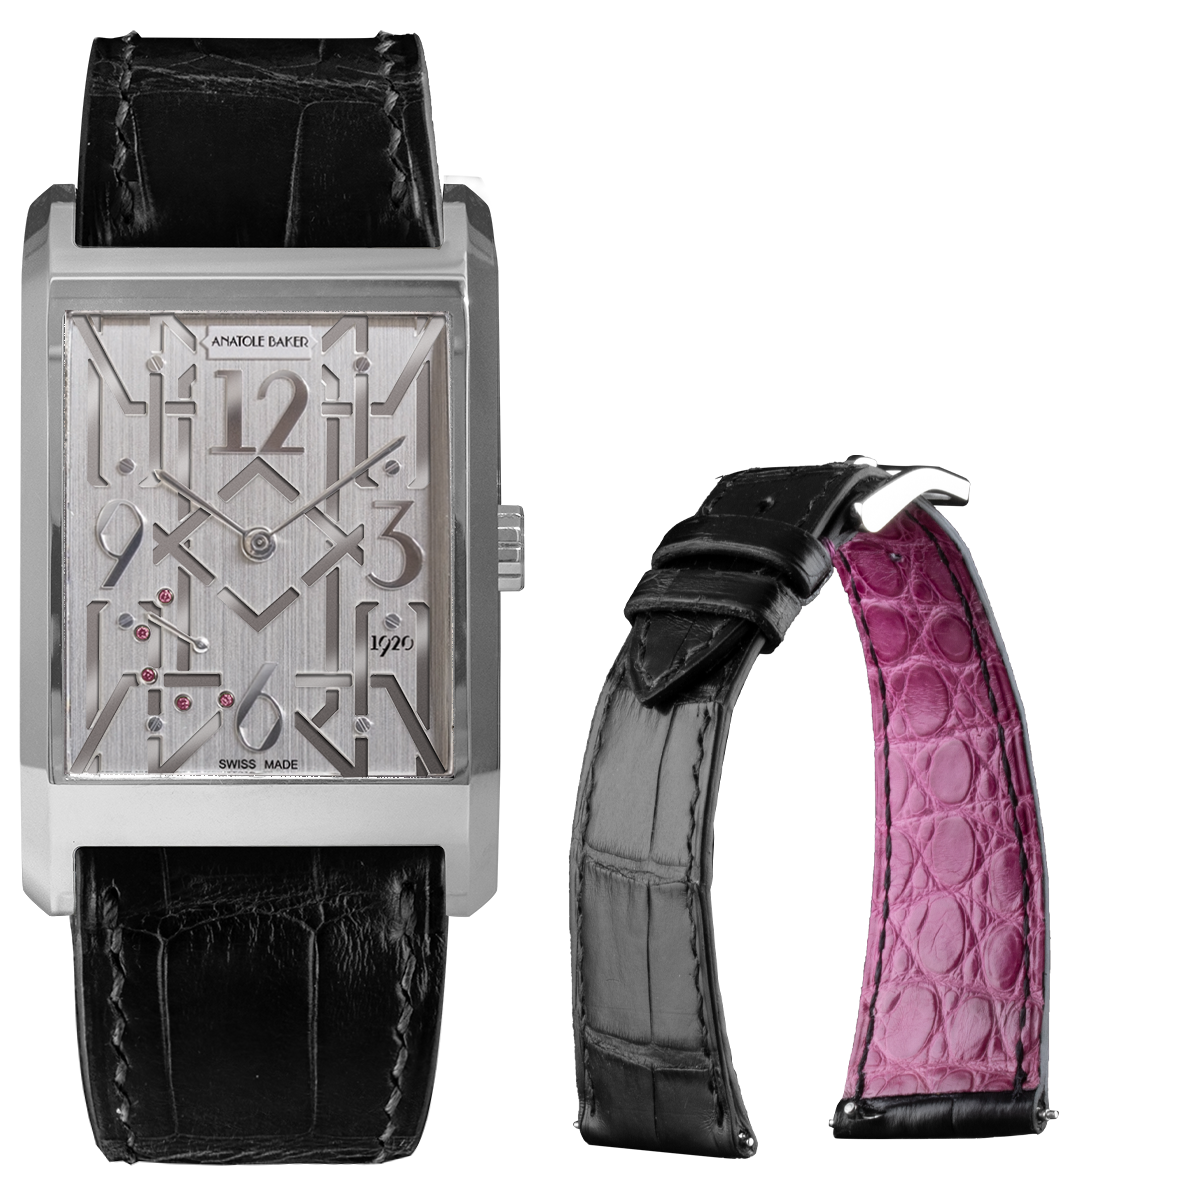 ANATOLE BAKER 1920 - Gatsby pink rubies - Black alligator strap with pink lining